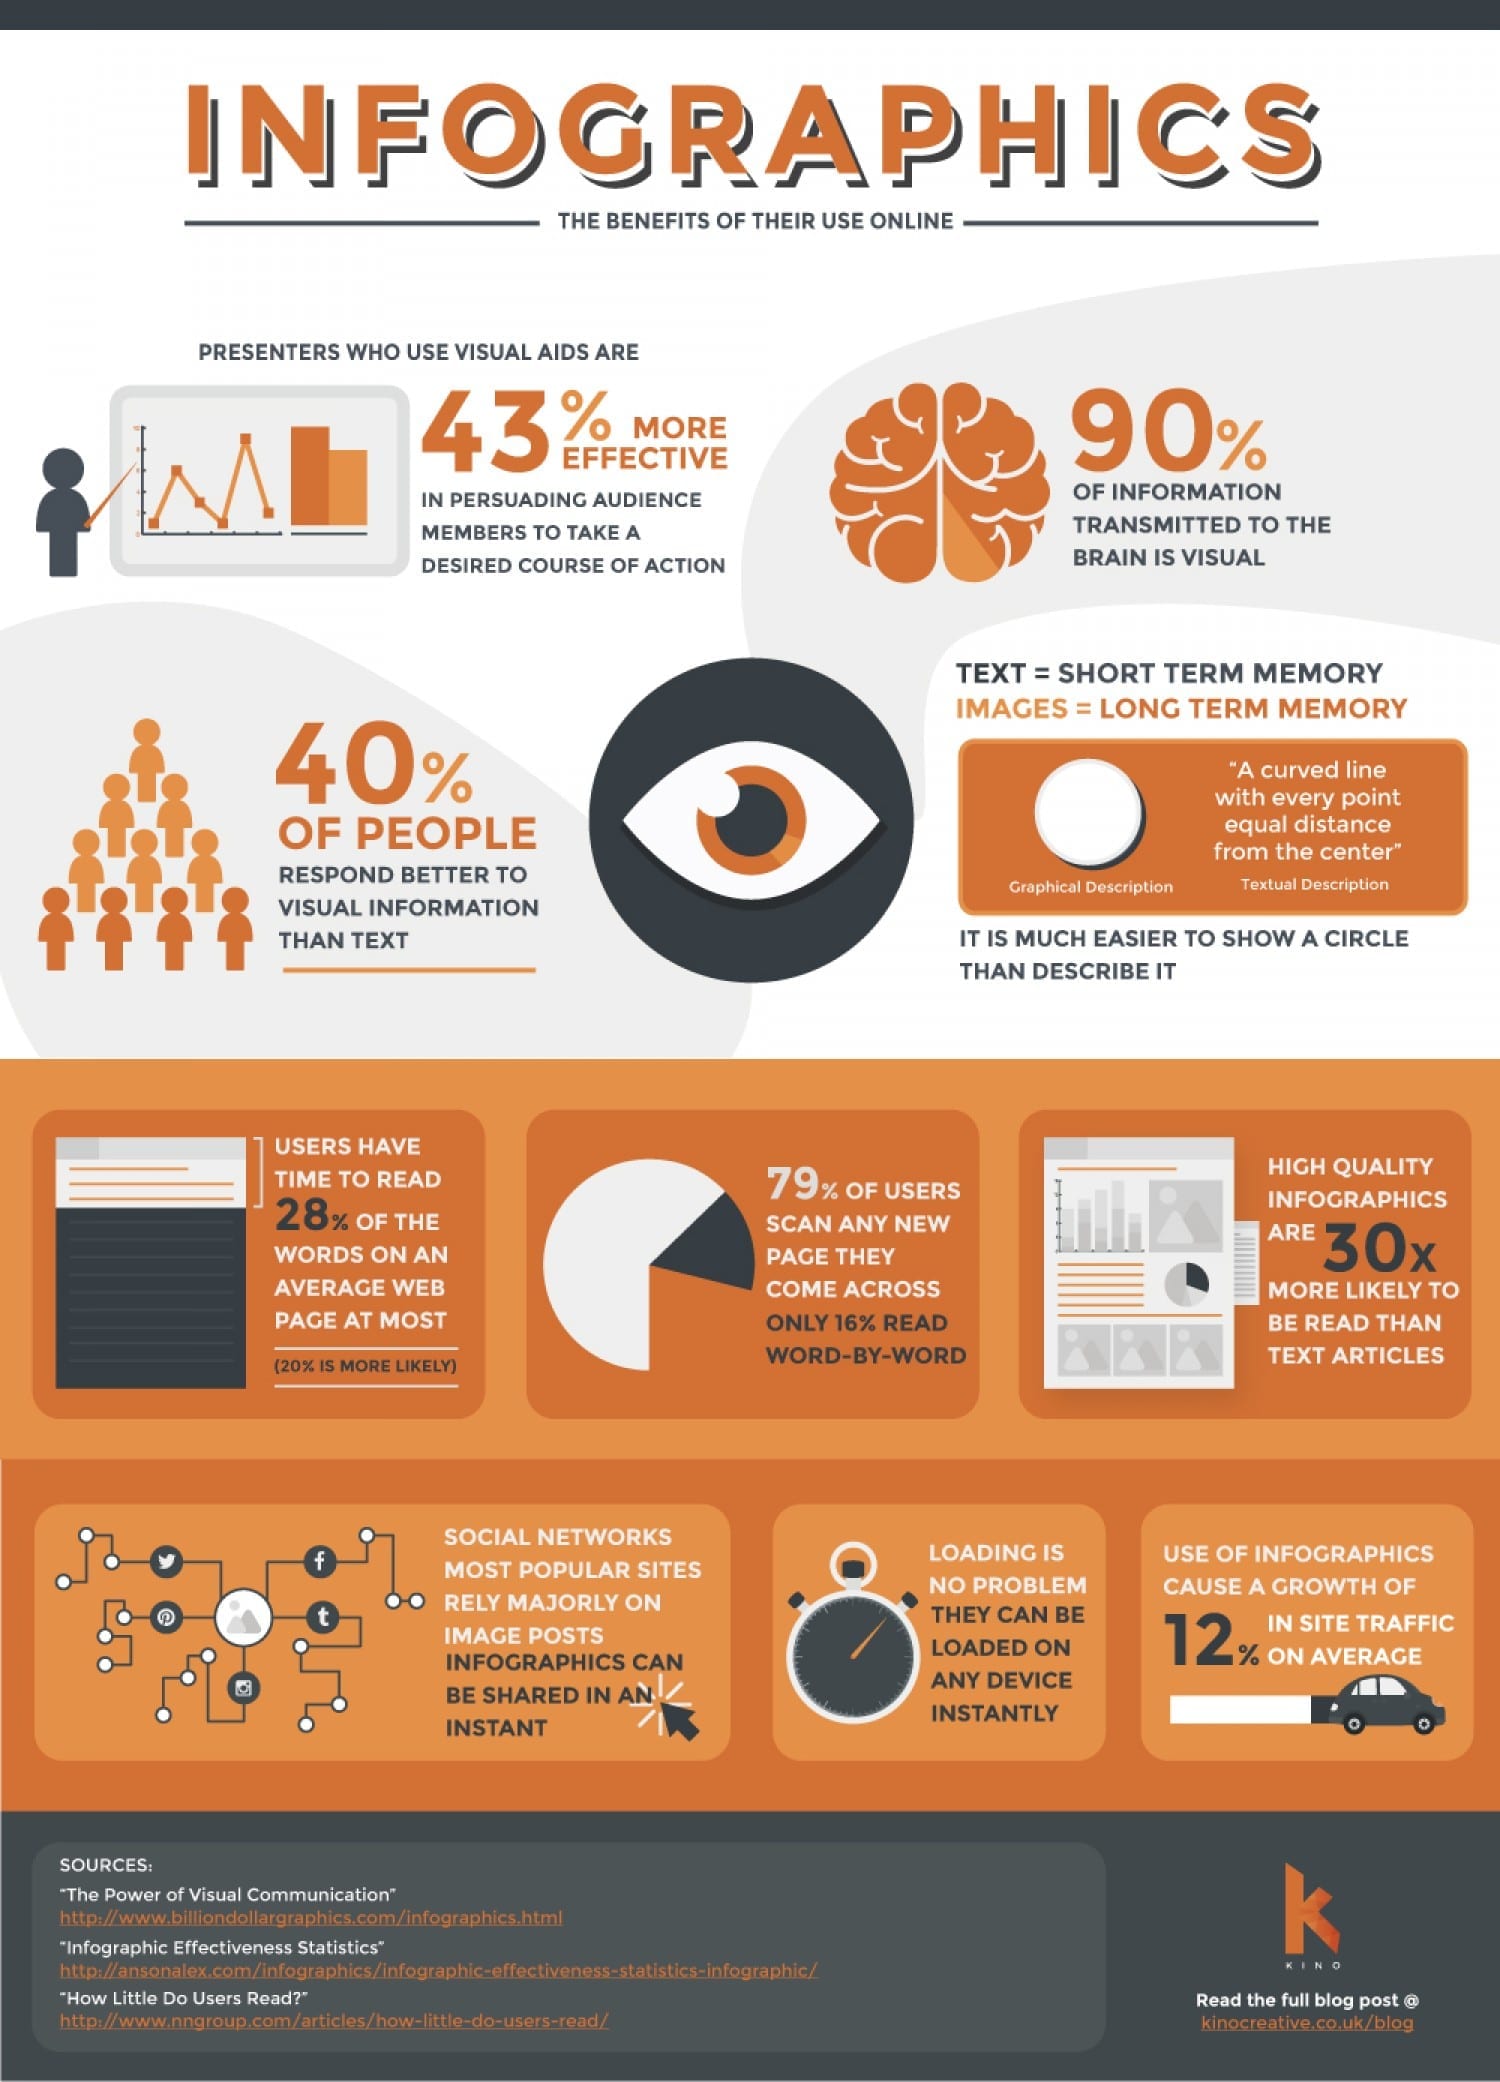 Infographic about the benefits of infographic use online - but it is not accessible.